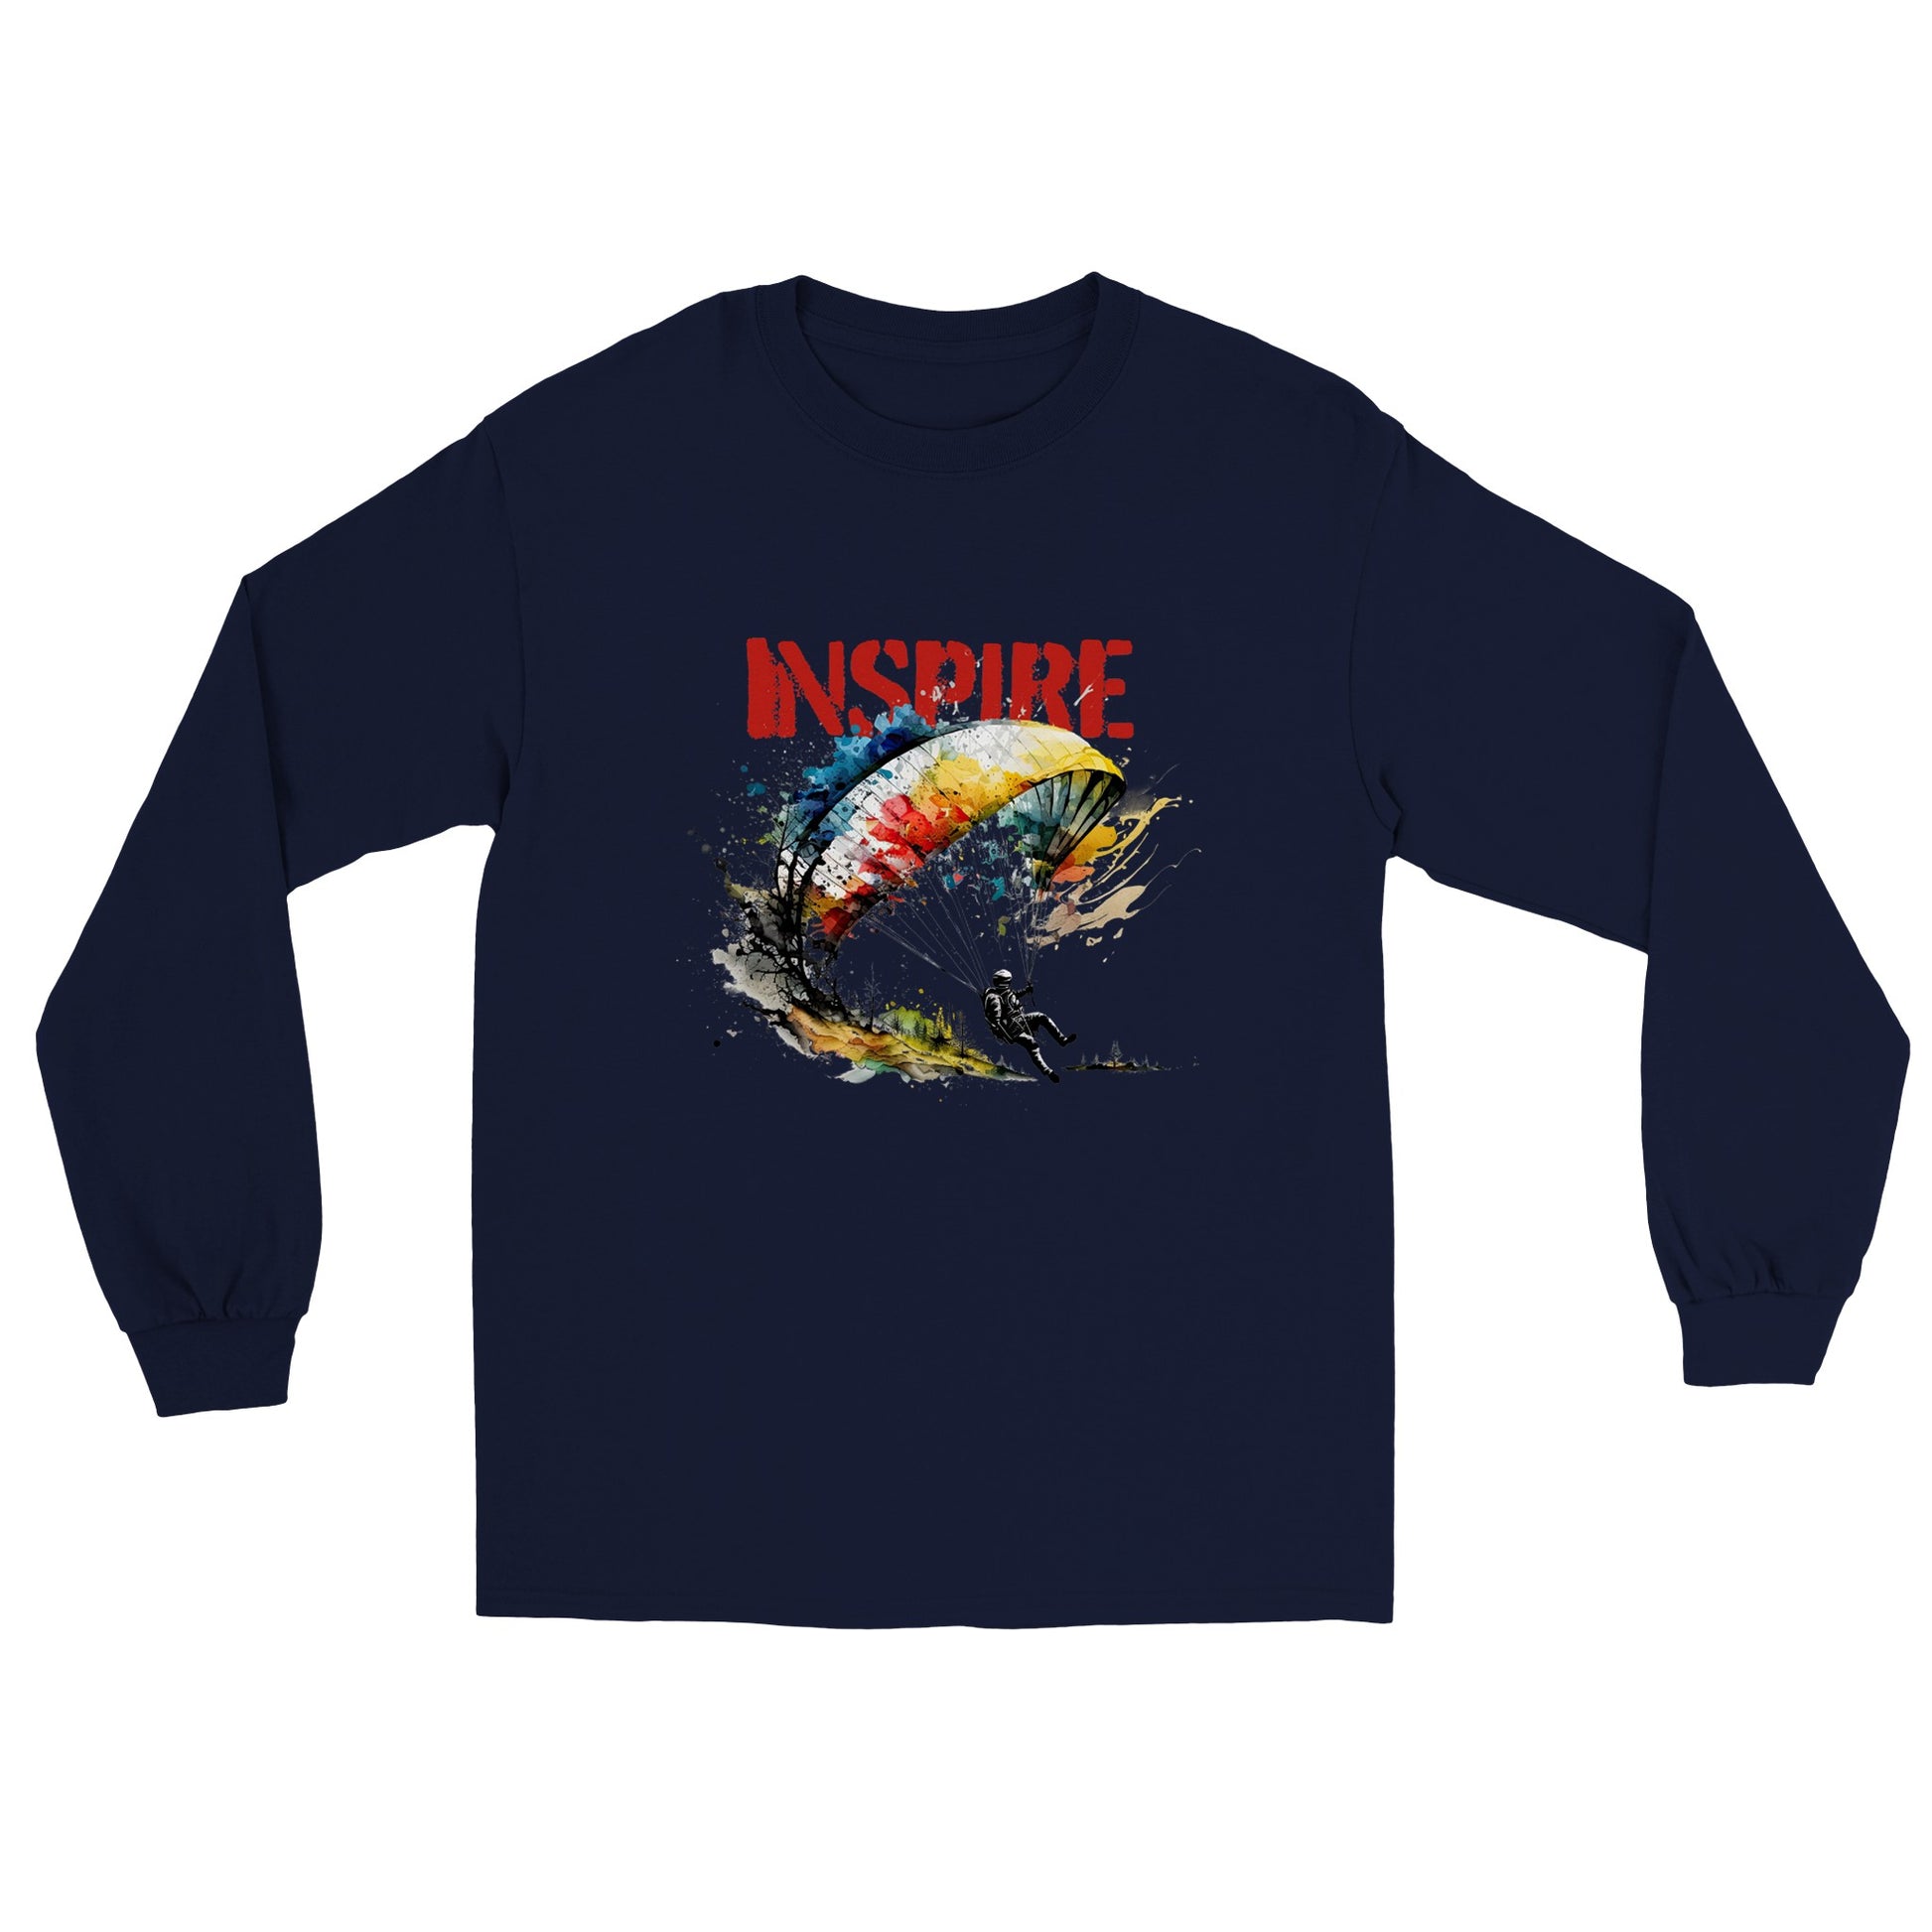 Navy blue long sleeve t-shirt with a paraglider graphic and Inspire caption